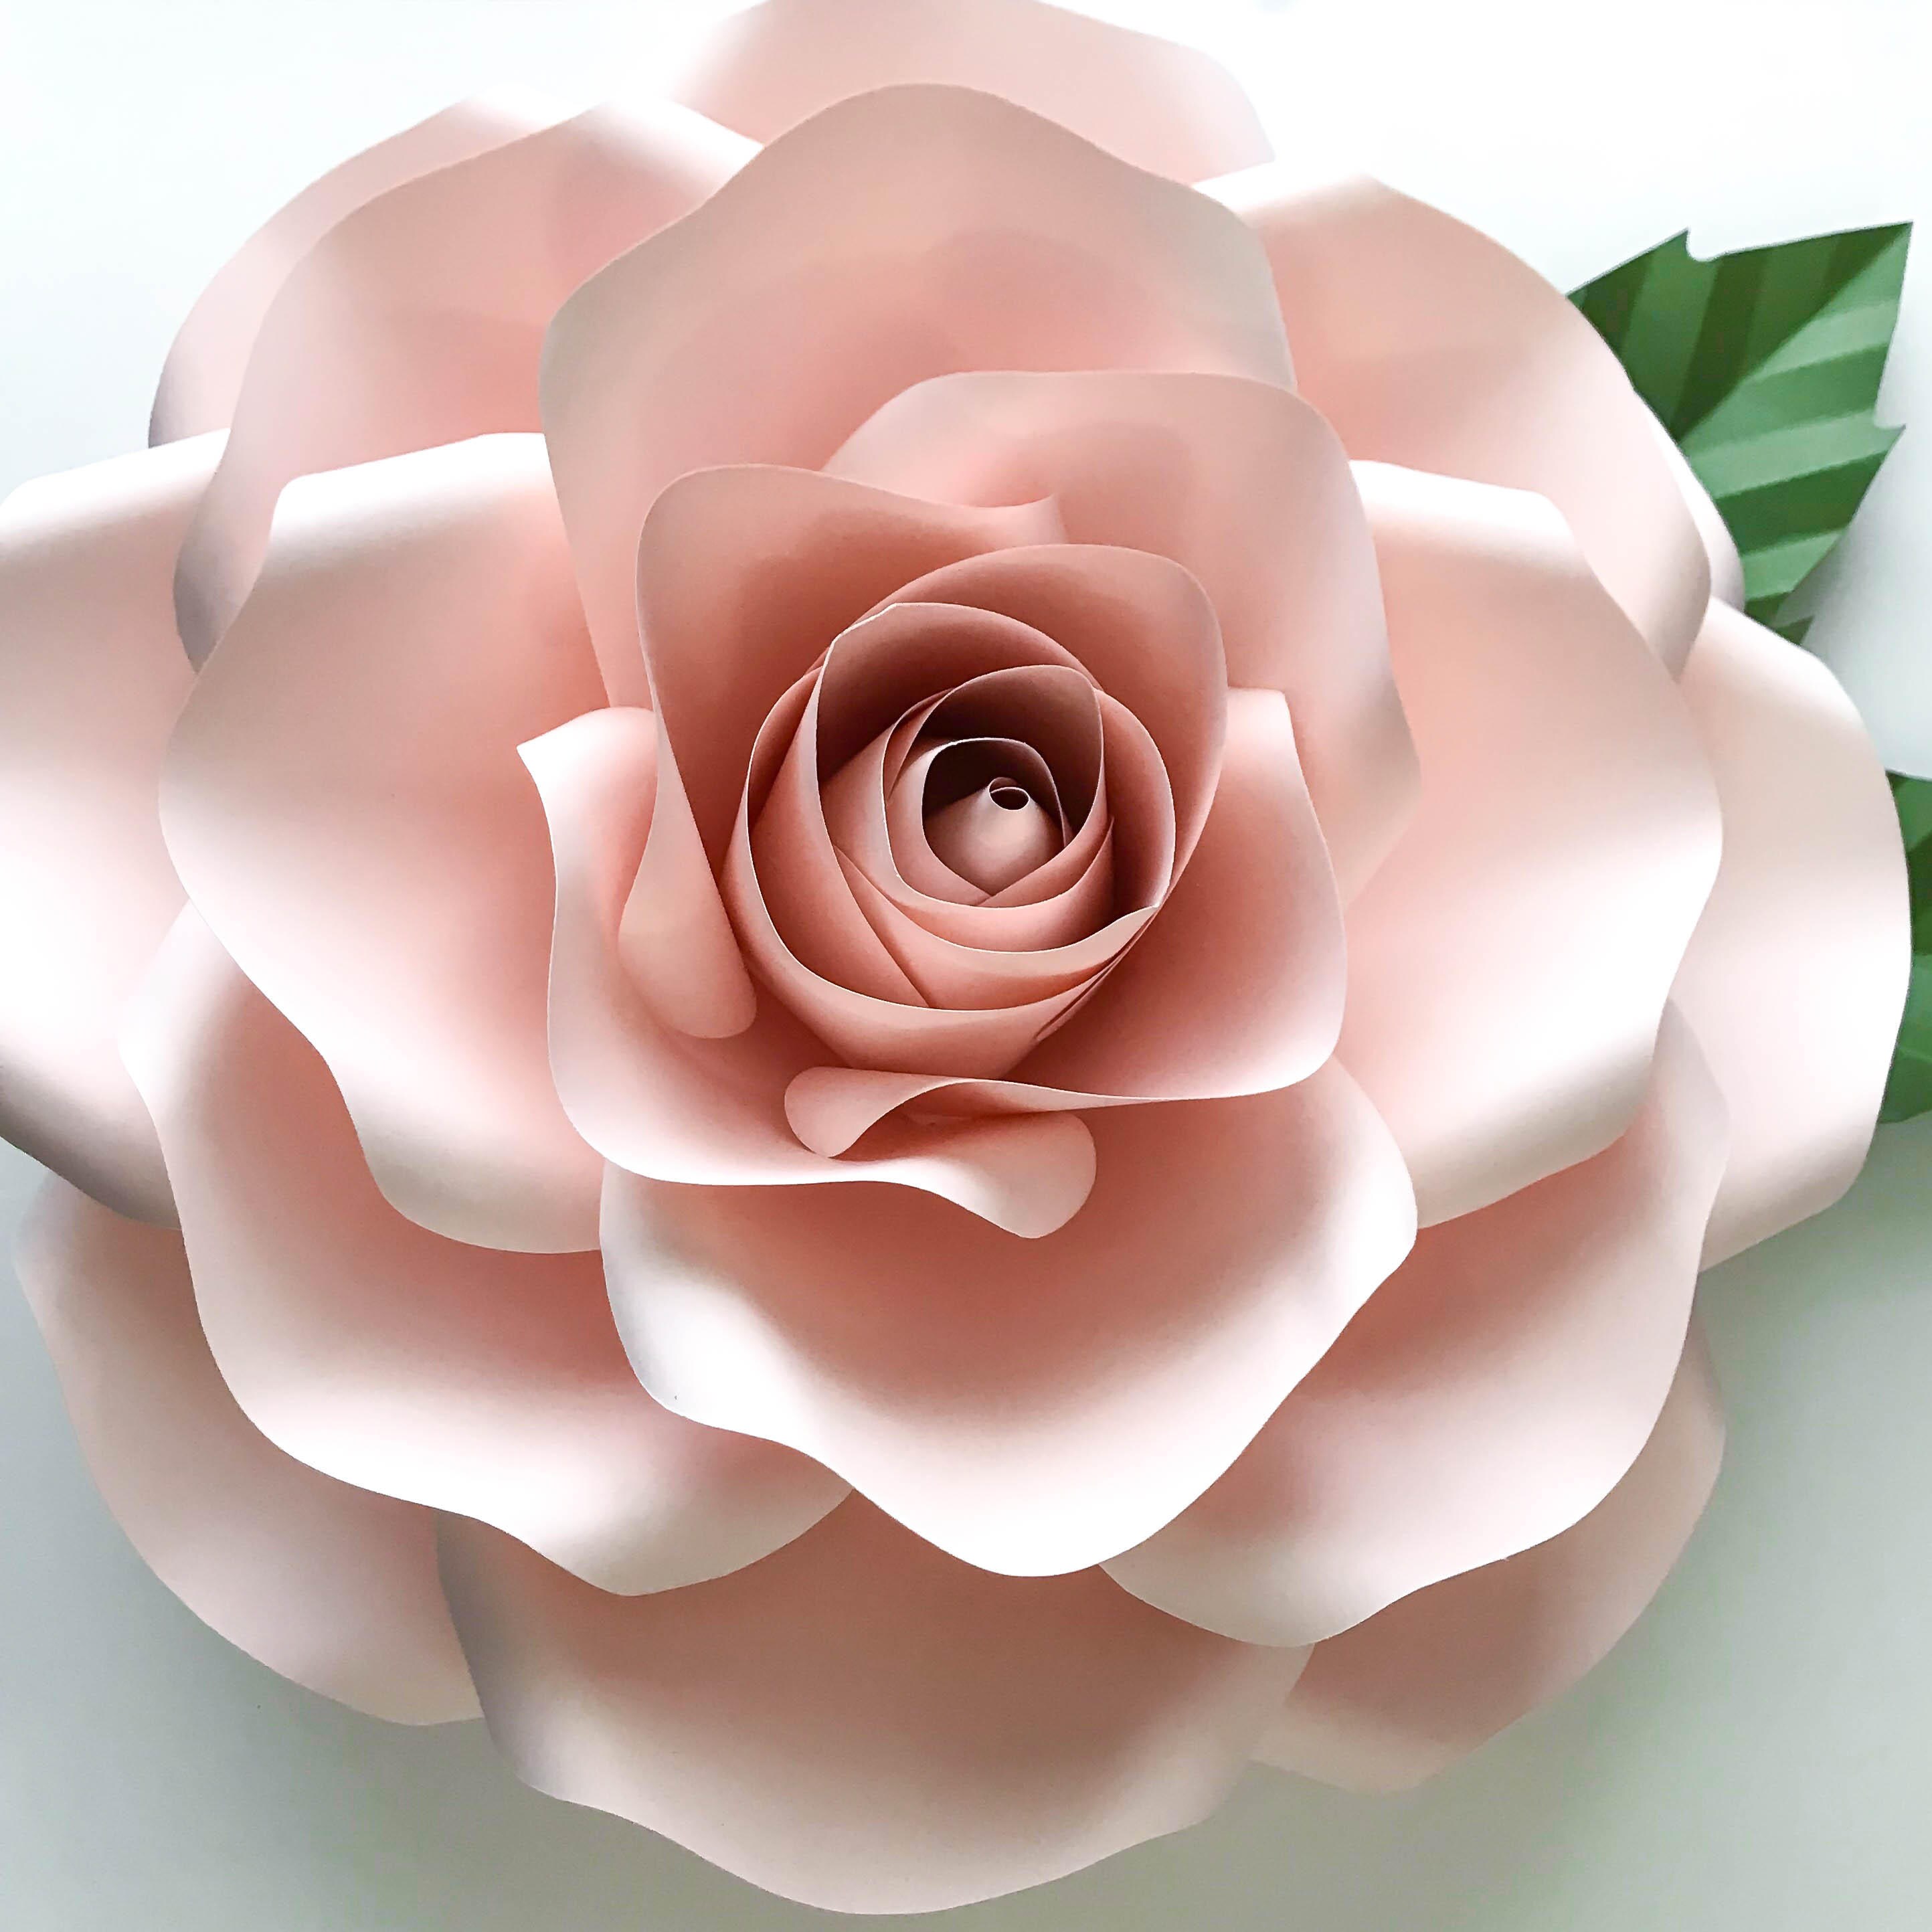 Free Paper Rose Template